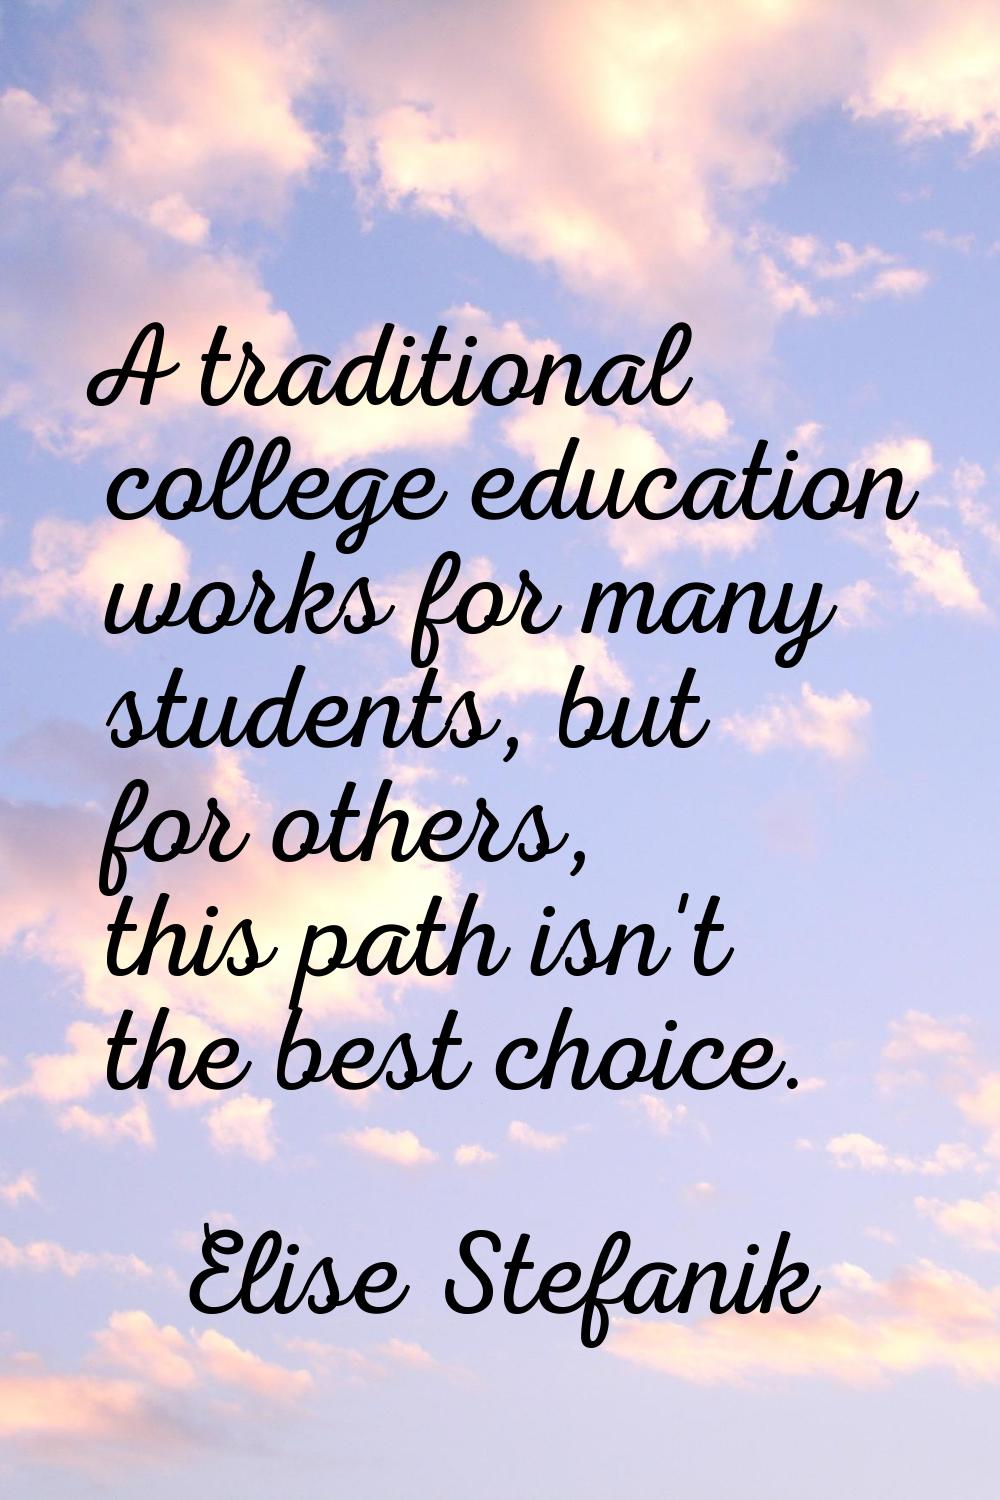 A traditional college education works for many students, but for others, this path isn't the best c